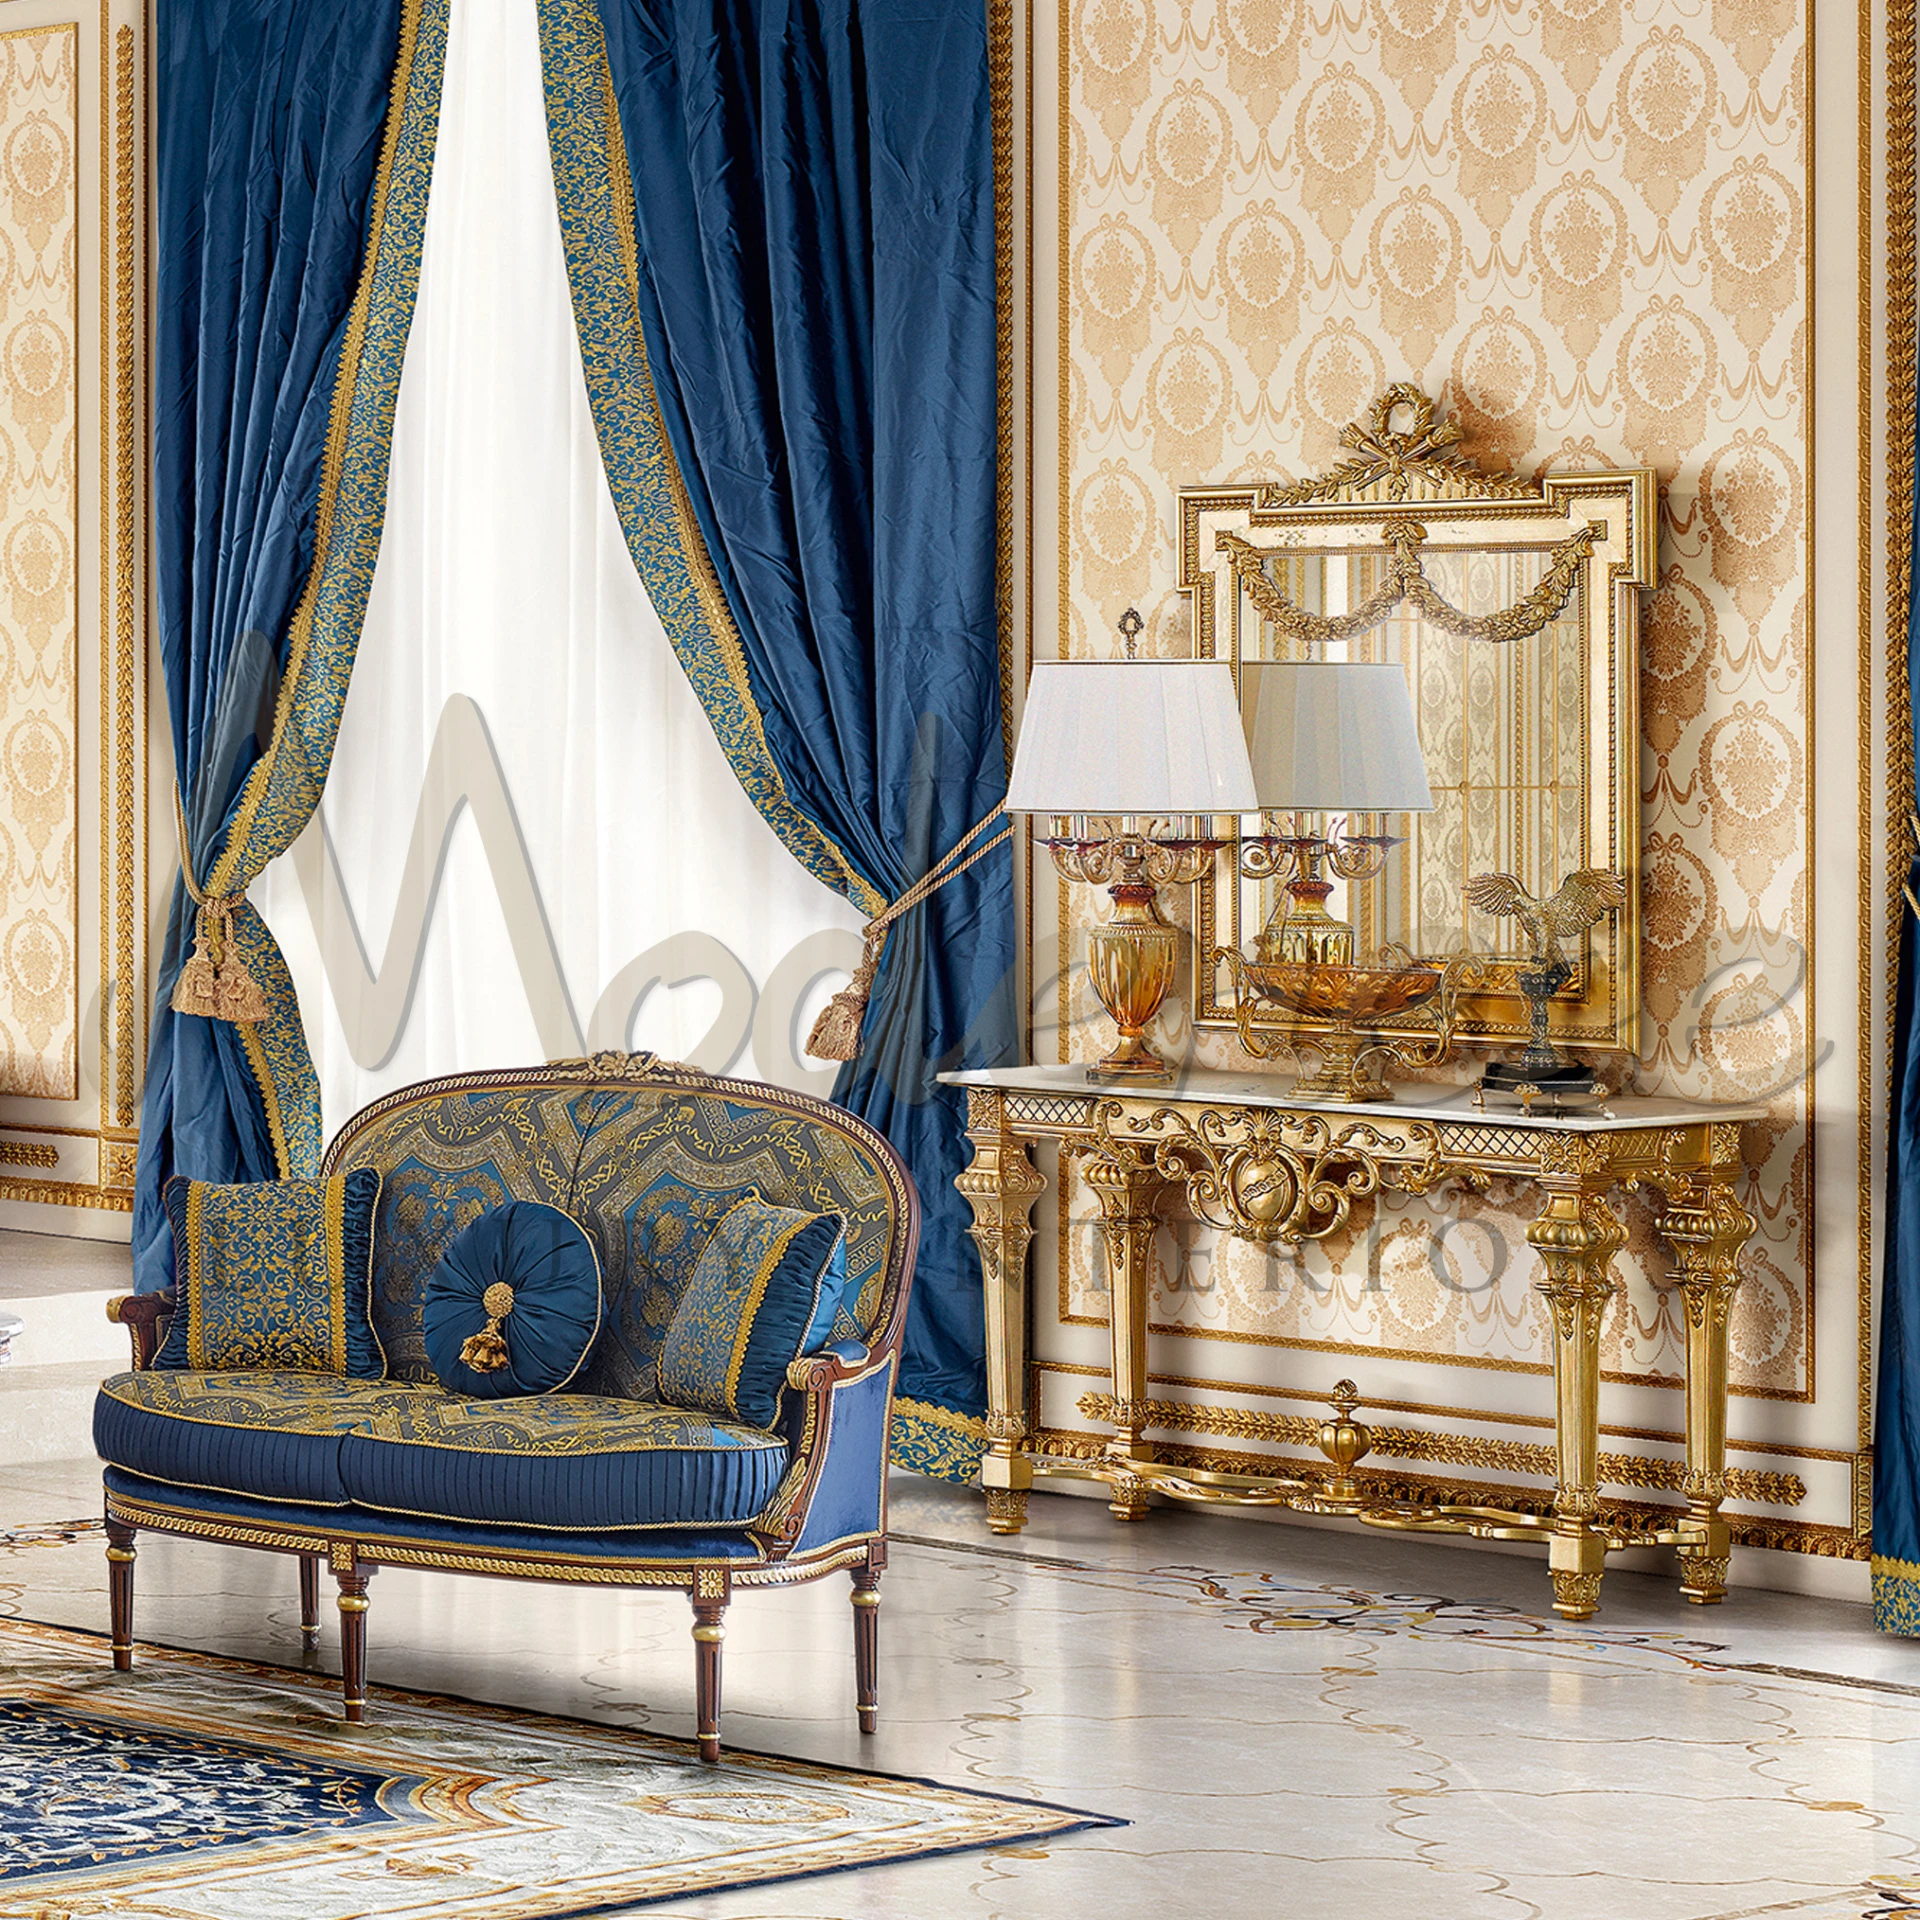 Luxury vase with intricate gold leaf patterns, embodying sophistication in modern and classic style interiors.